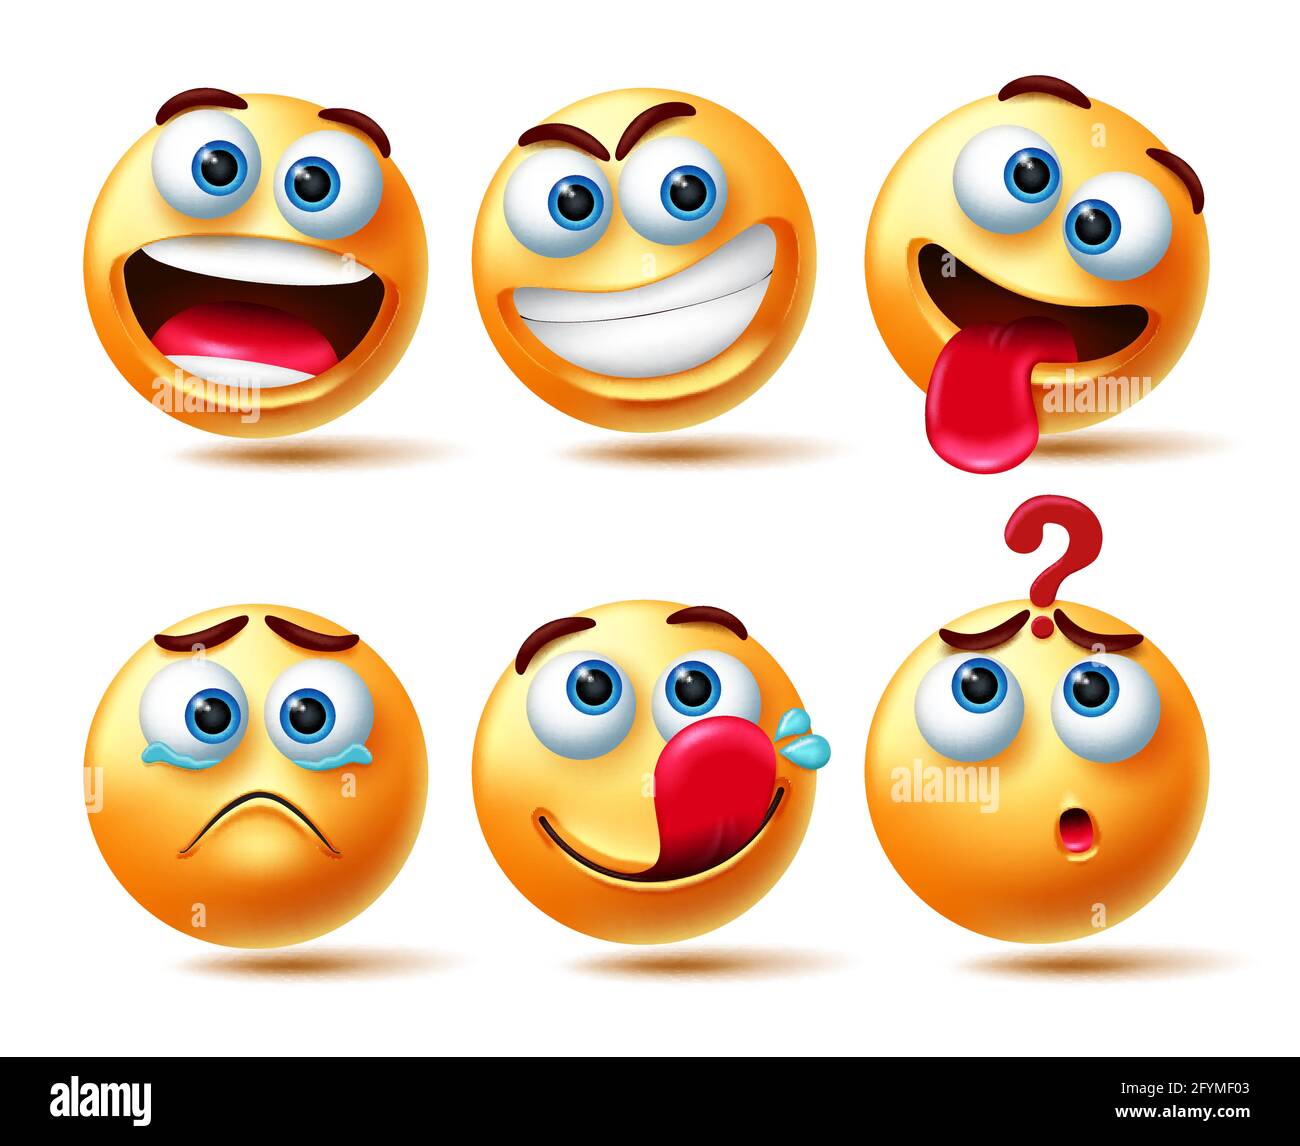 Smileys emoticon vector set. Emoticons 3d smiley characters in happy, smirk, teary eyed and confuse expression for emoticons character collection. Stock Vector